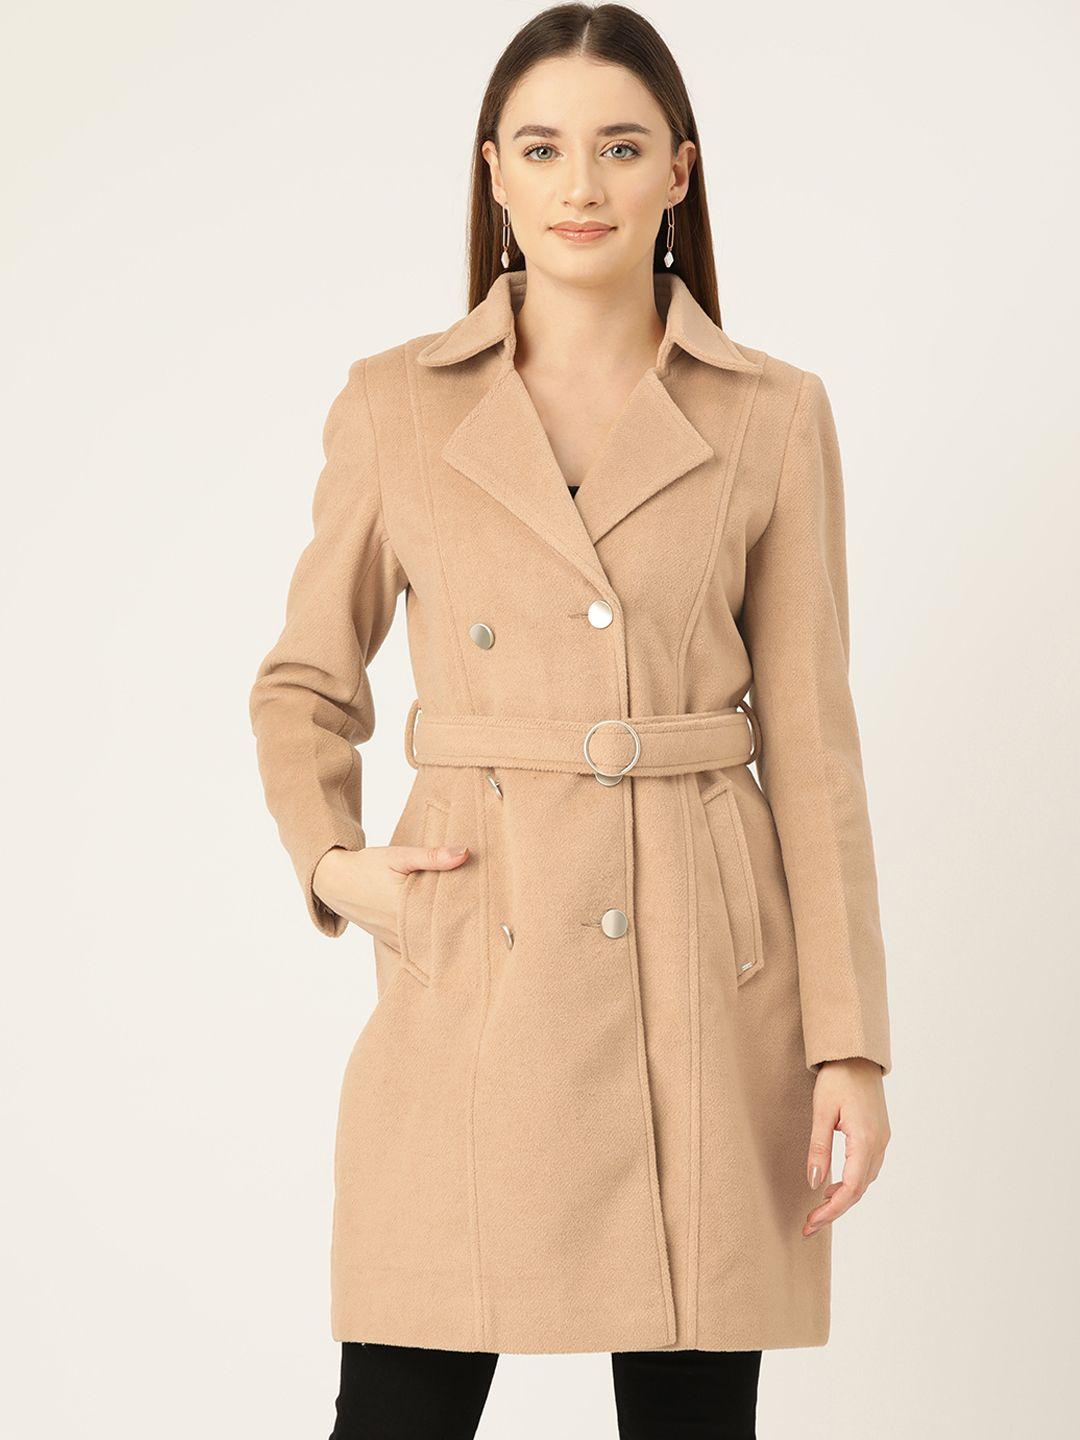 okane notched lapel collar double-breasted belted longline over coat